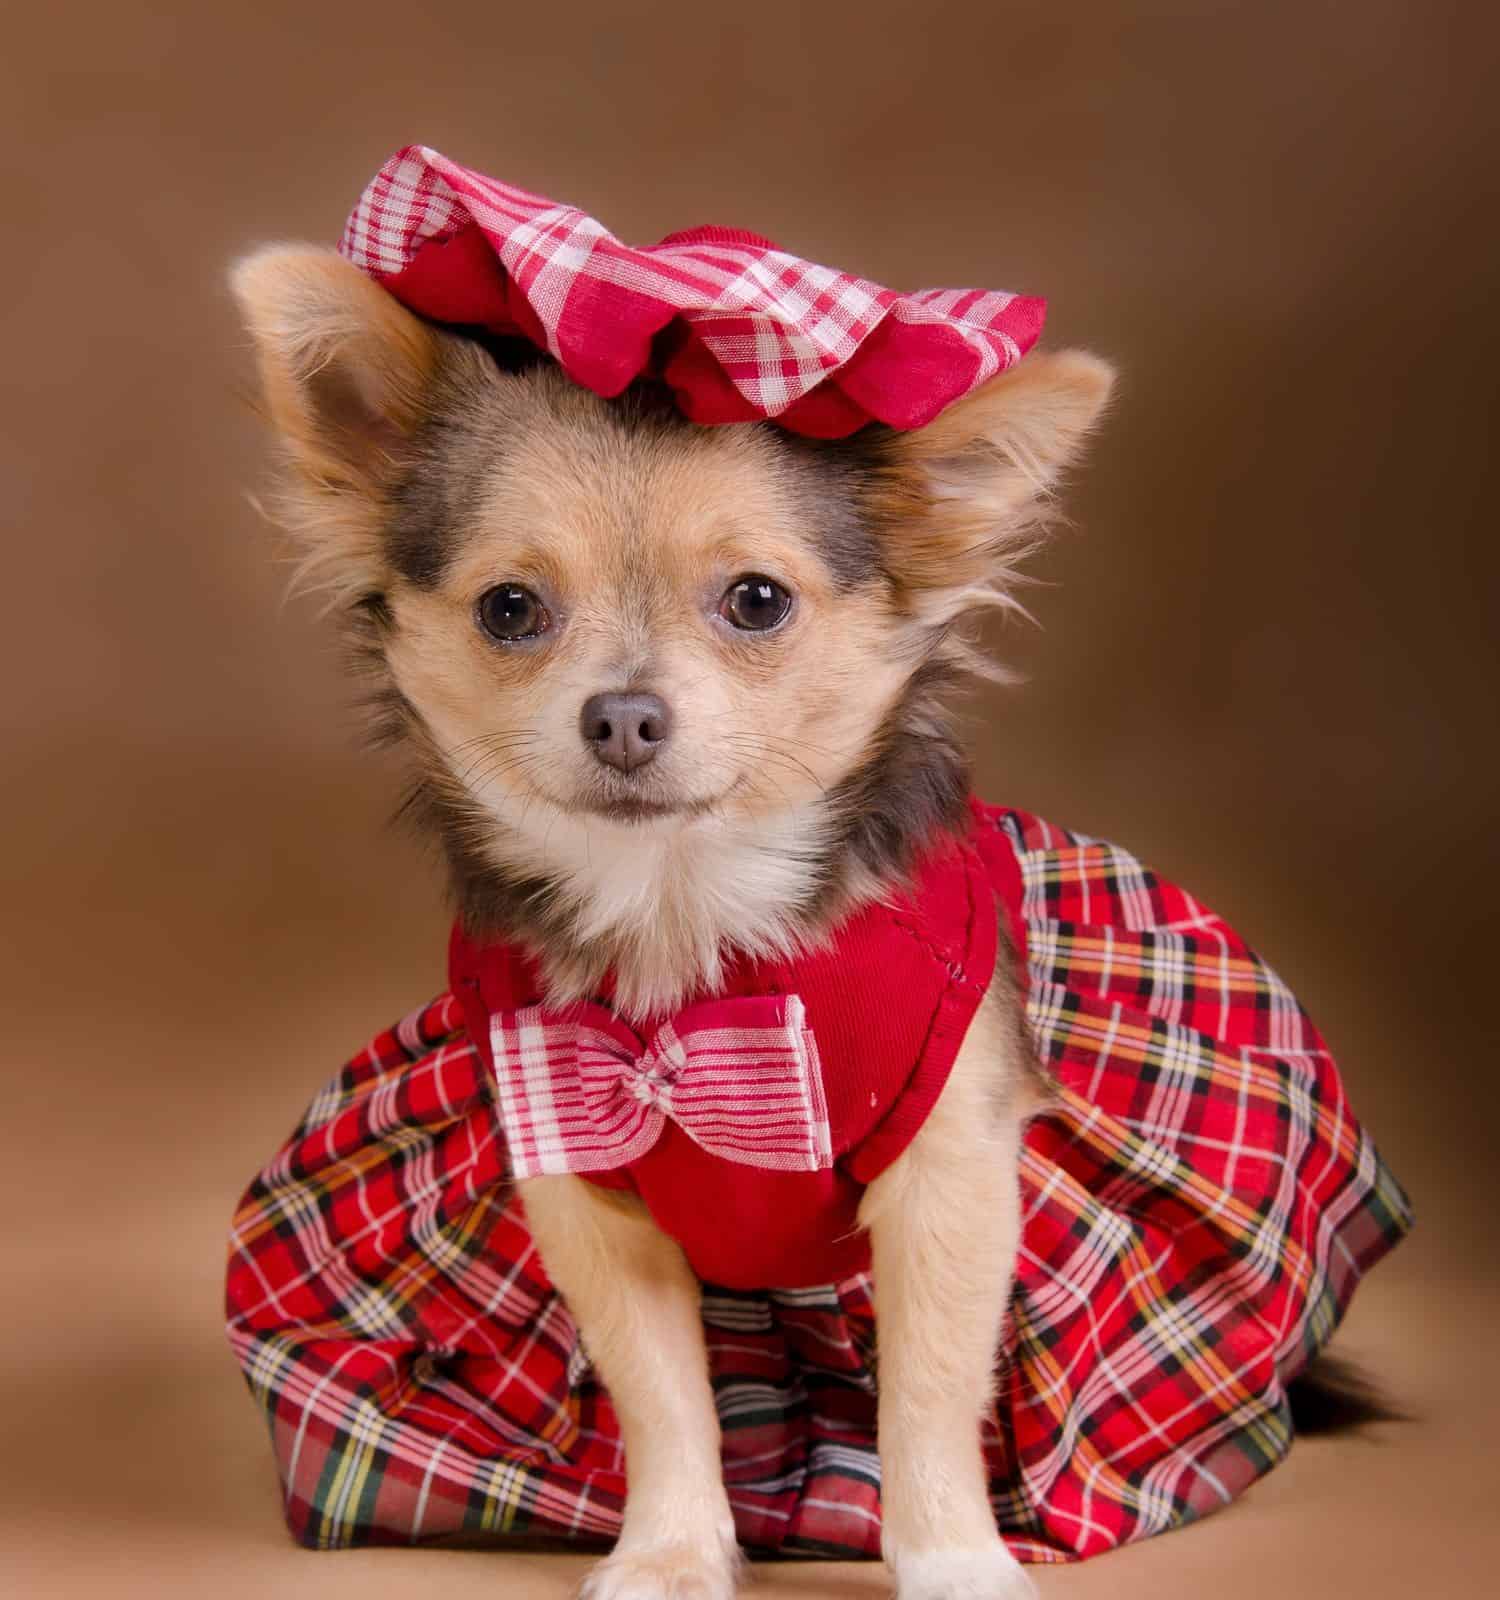 Chihuahua puppy wearing red chequered dress and cap isolated